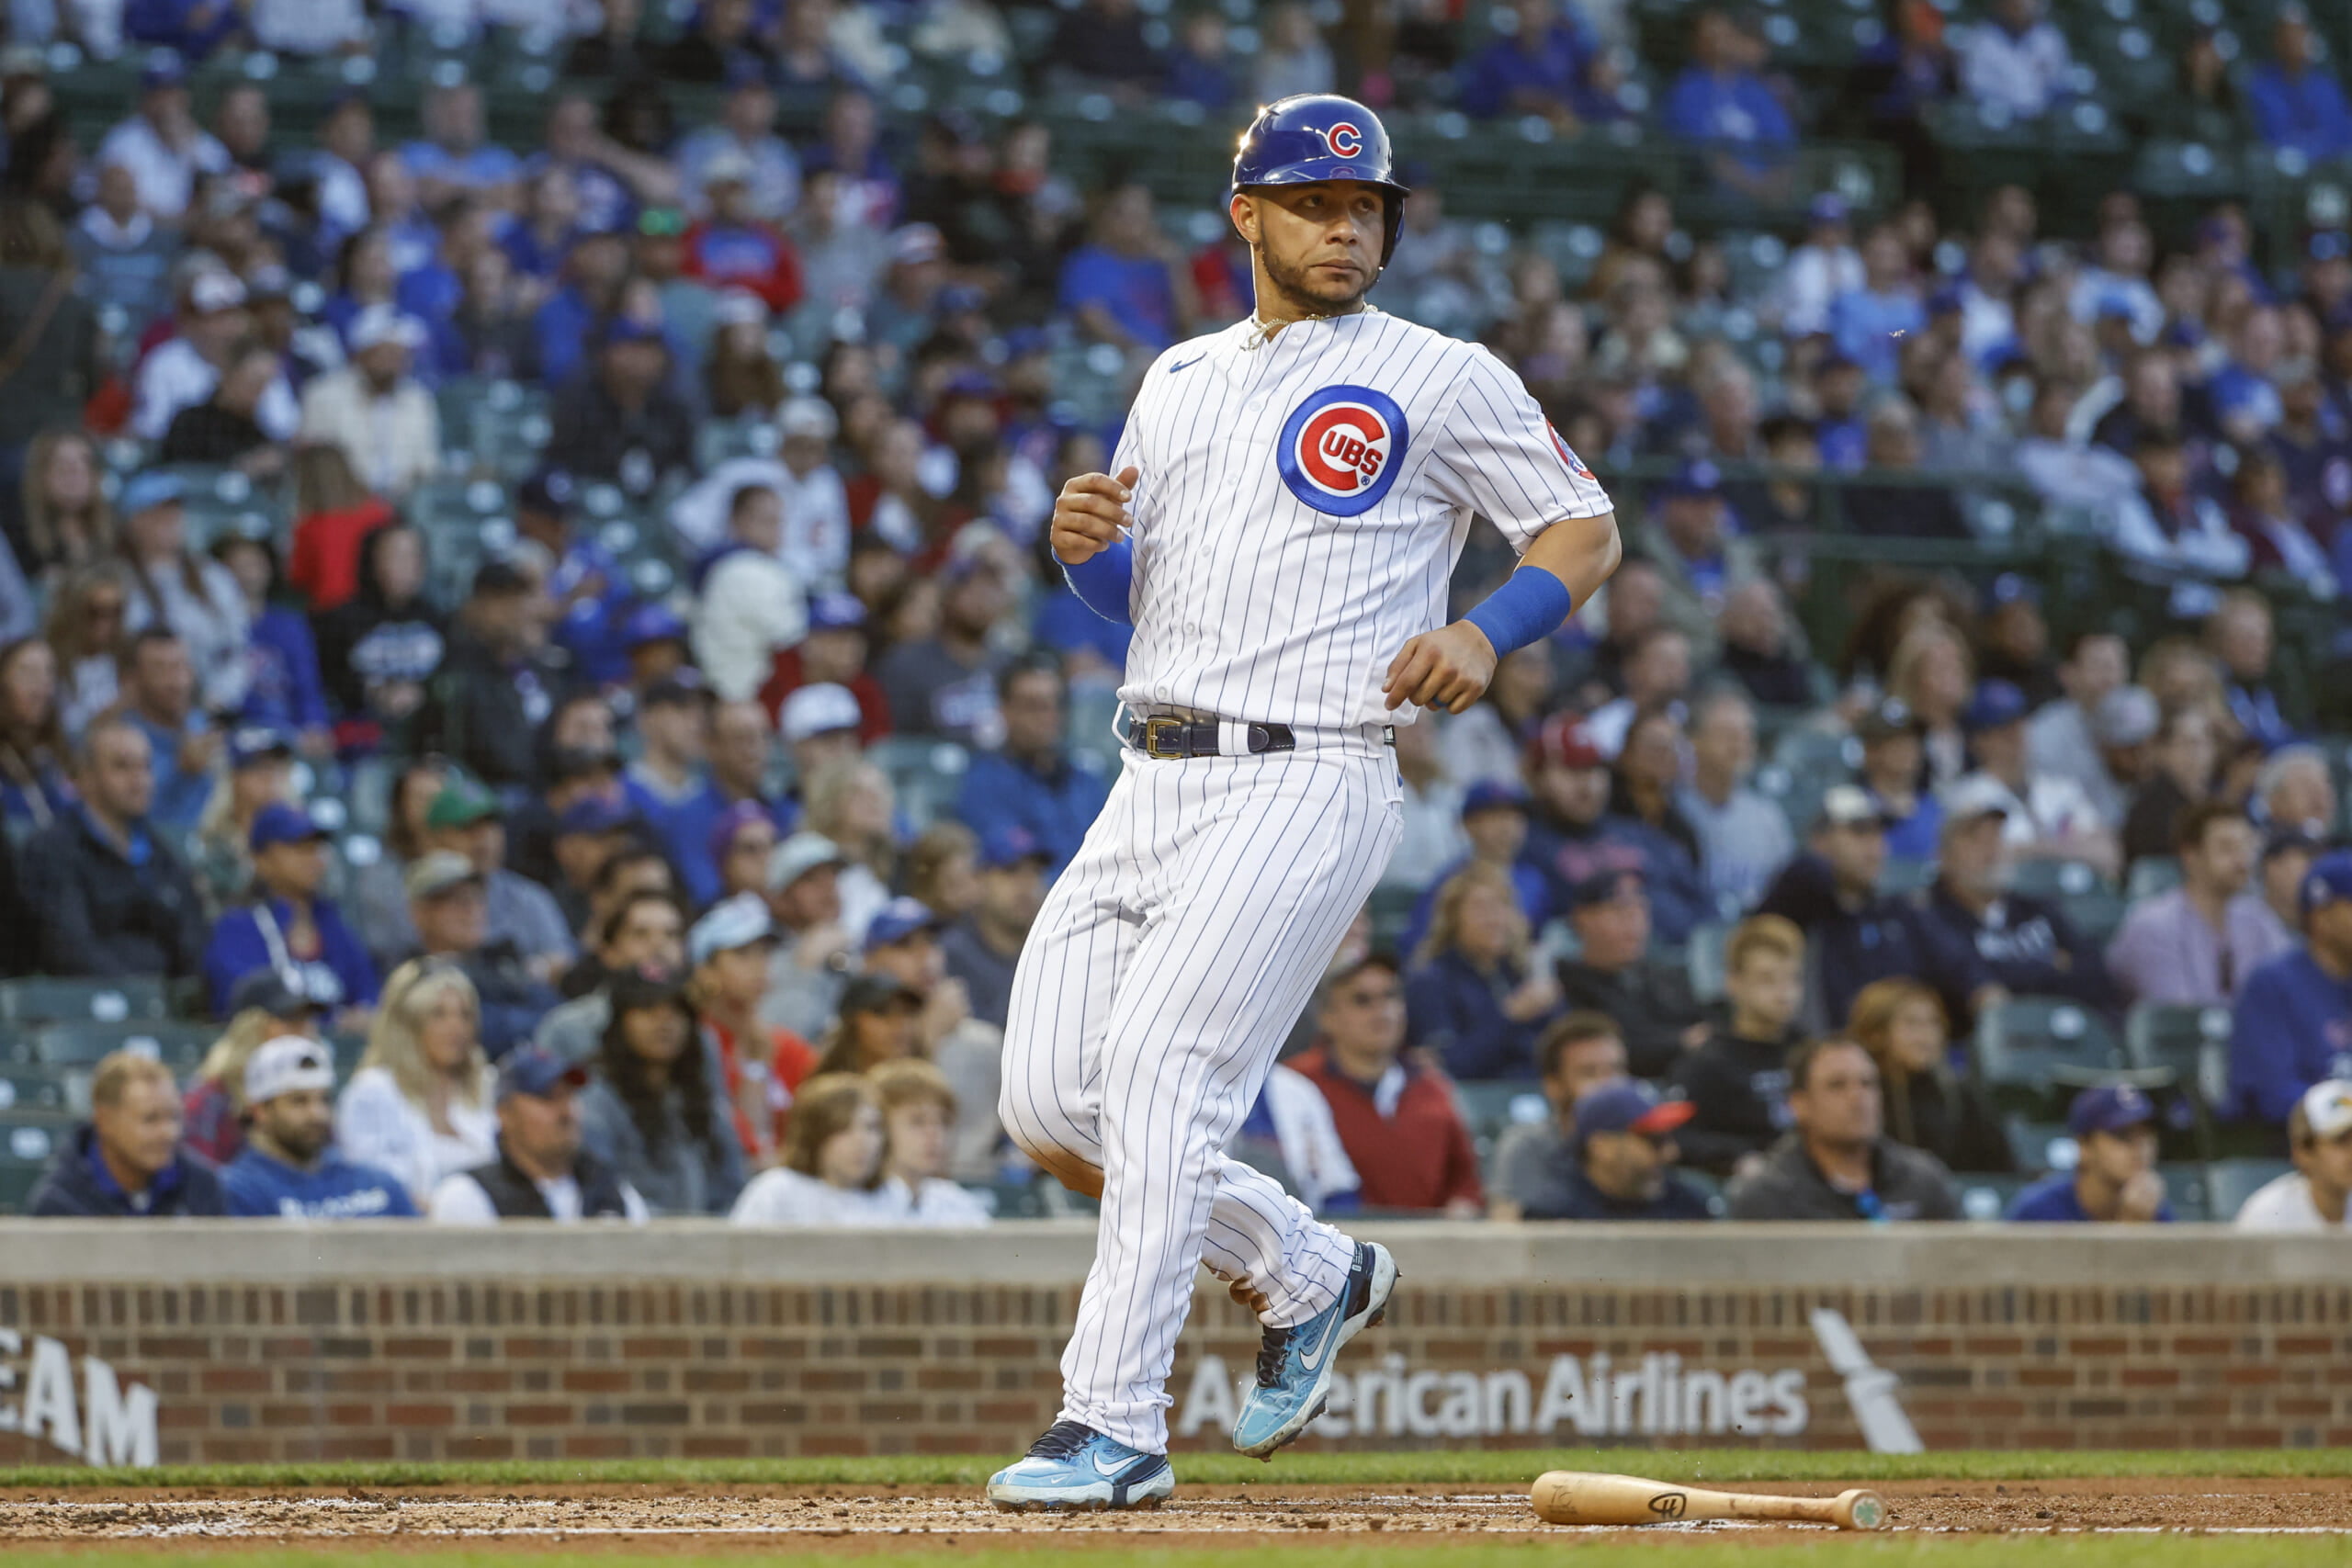 Why did Cubs not want to keep Willson Contreras?